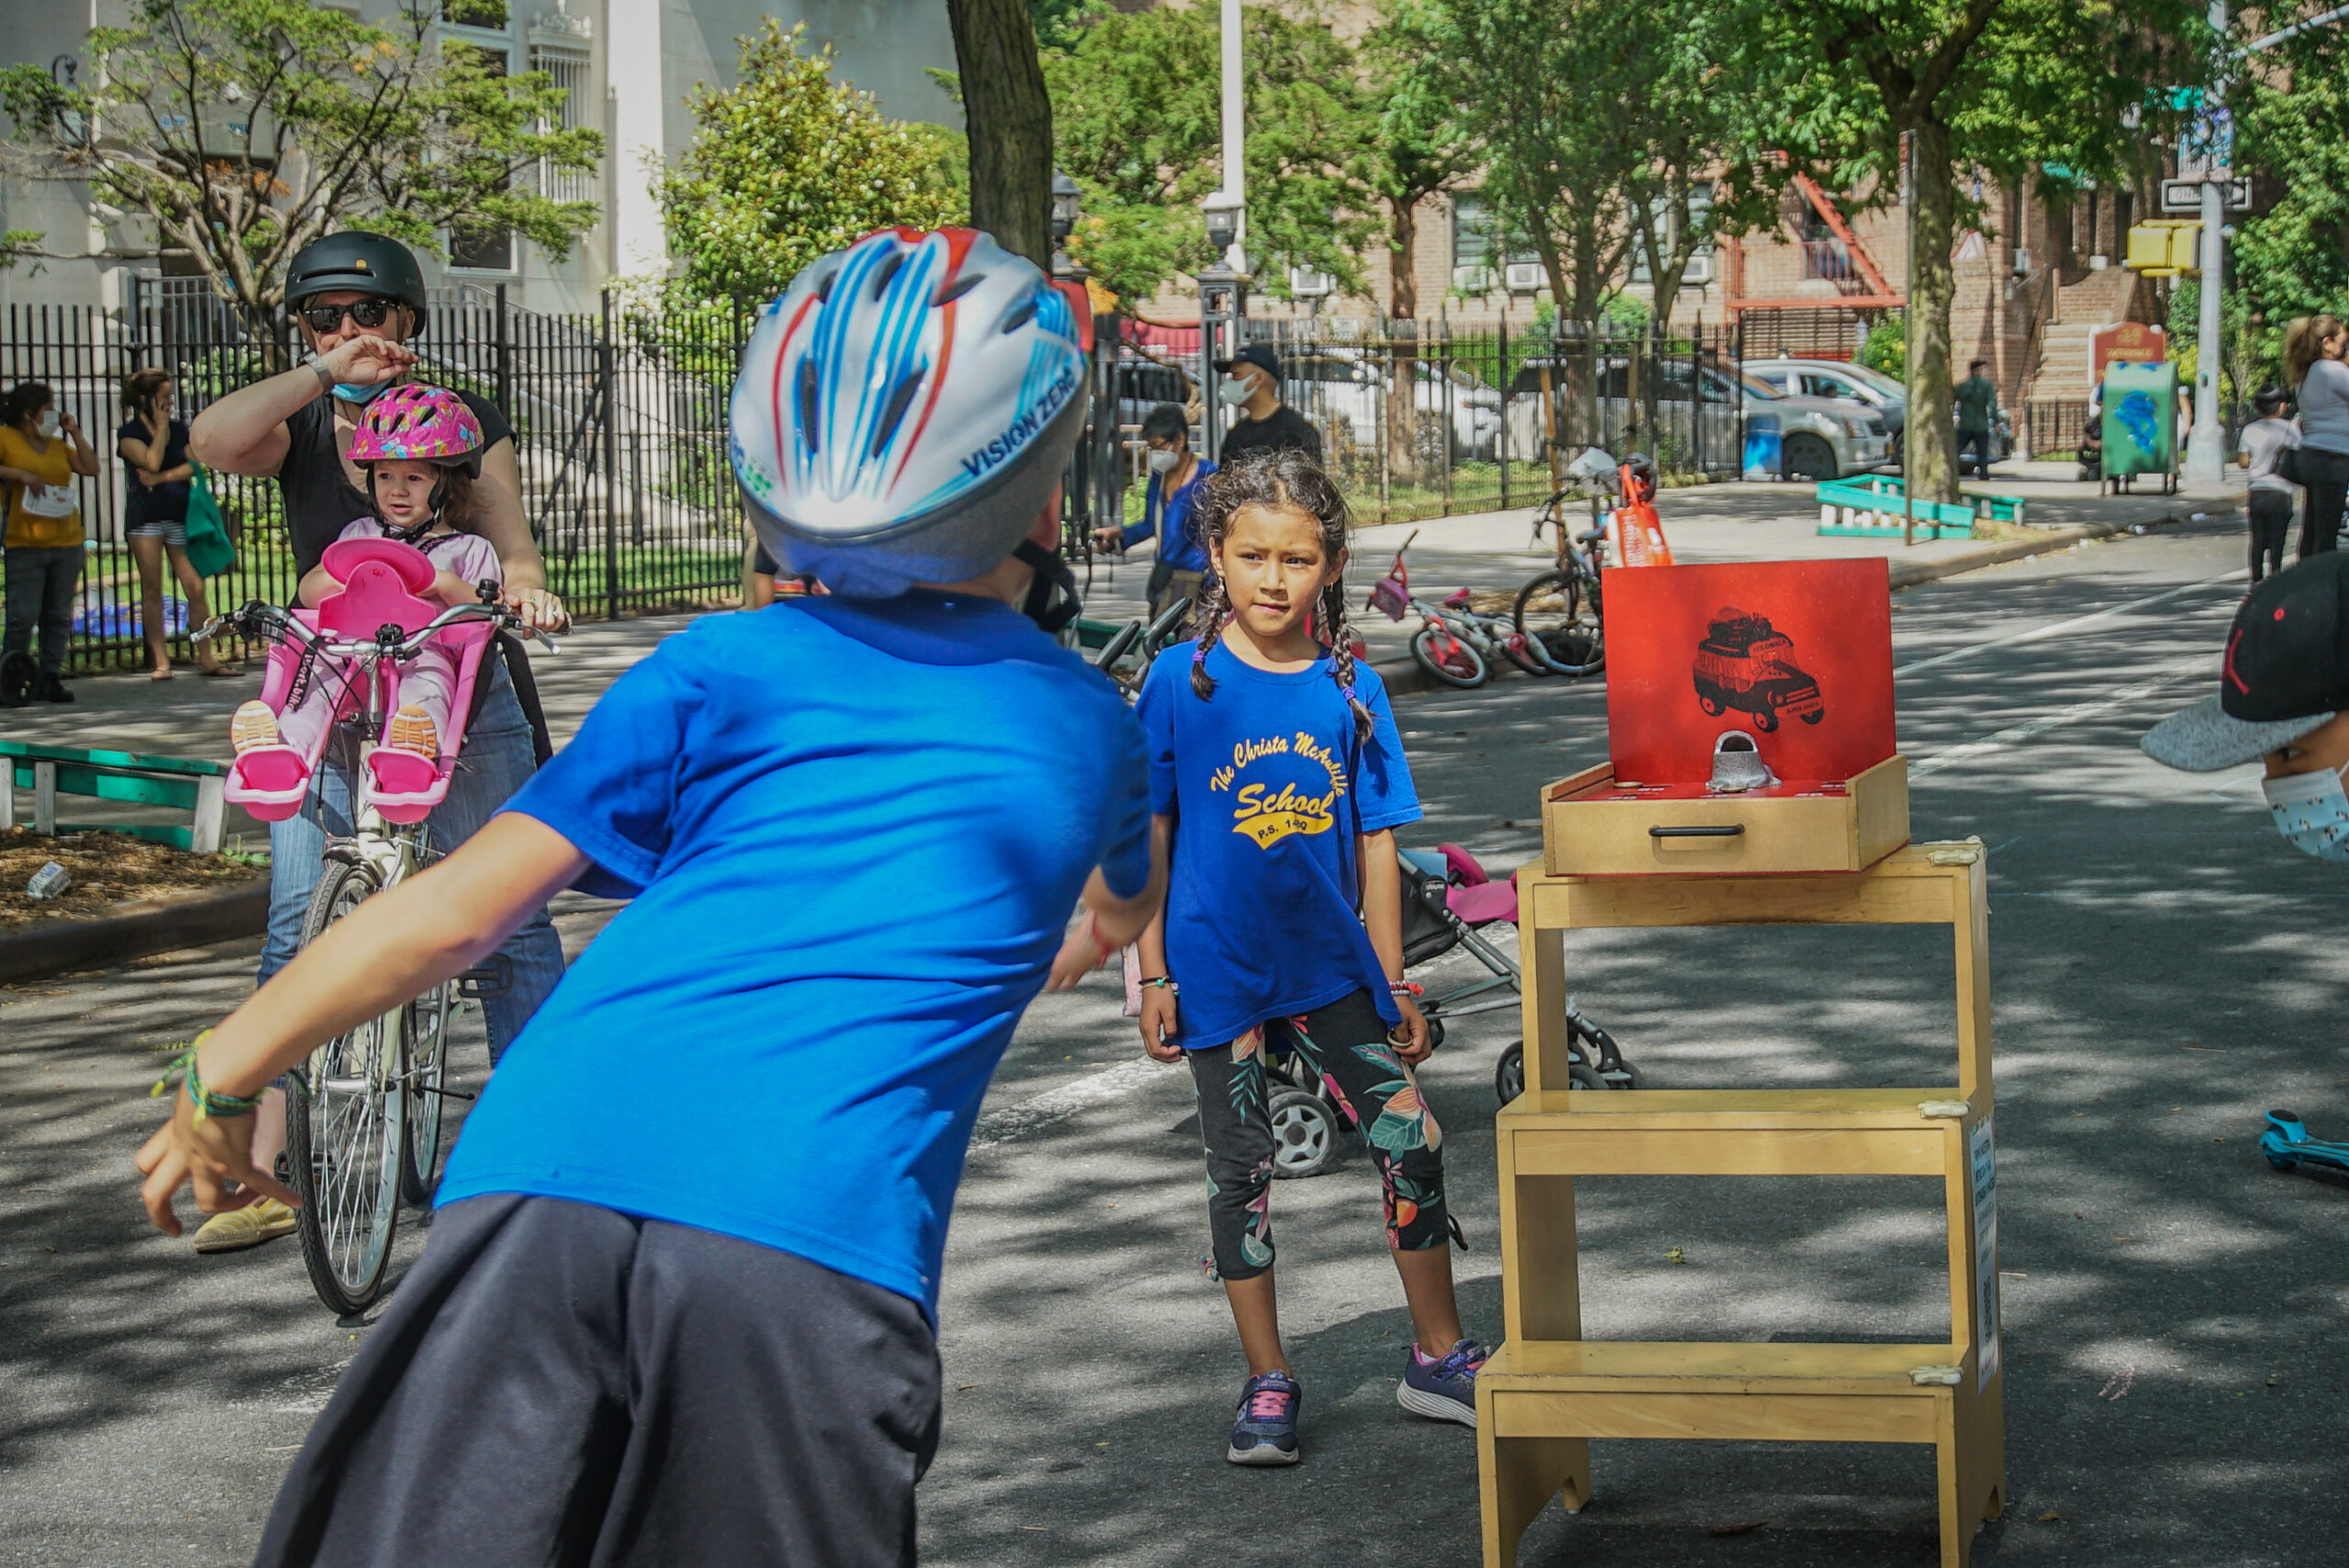 A young boy wearing a blue shirt and a bicycle helmet is throwing a coin towards the sapo board, which resembles a small suitcase with the top open, and inside there is a metal frog with an open mouth. There are many people on 34th Avenue. A young girl watches the sapo game. A mother rides by on a bike with a child strapped in.